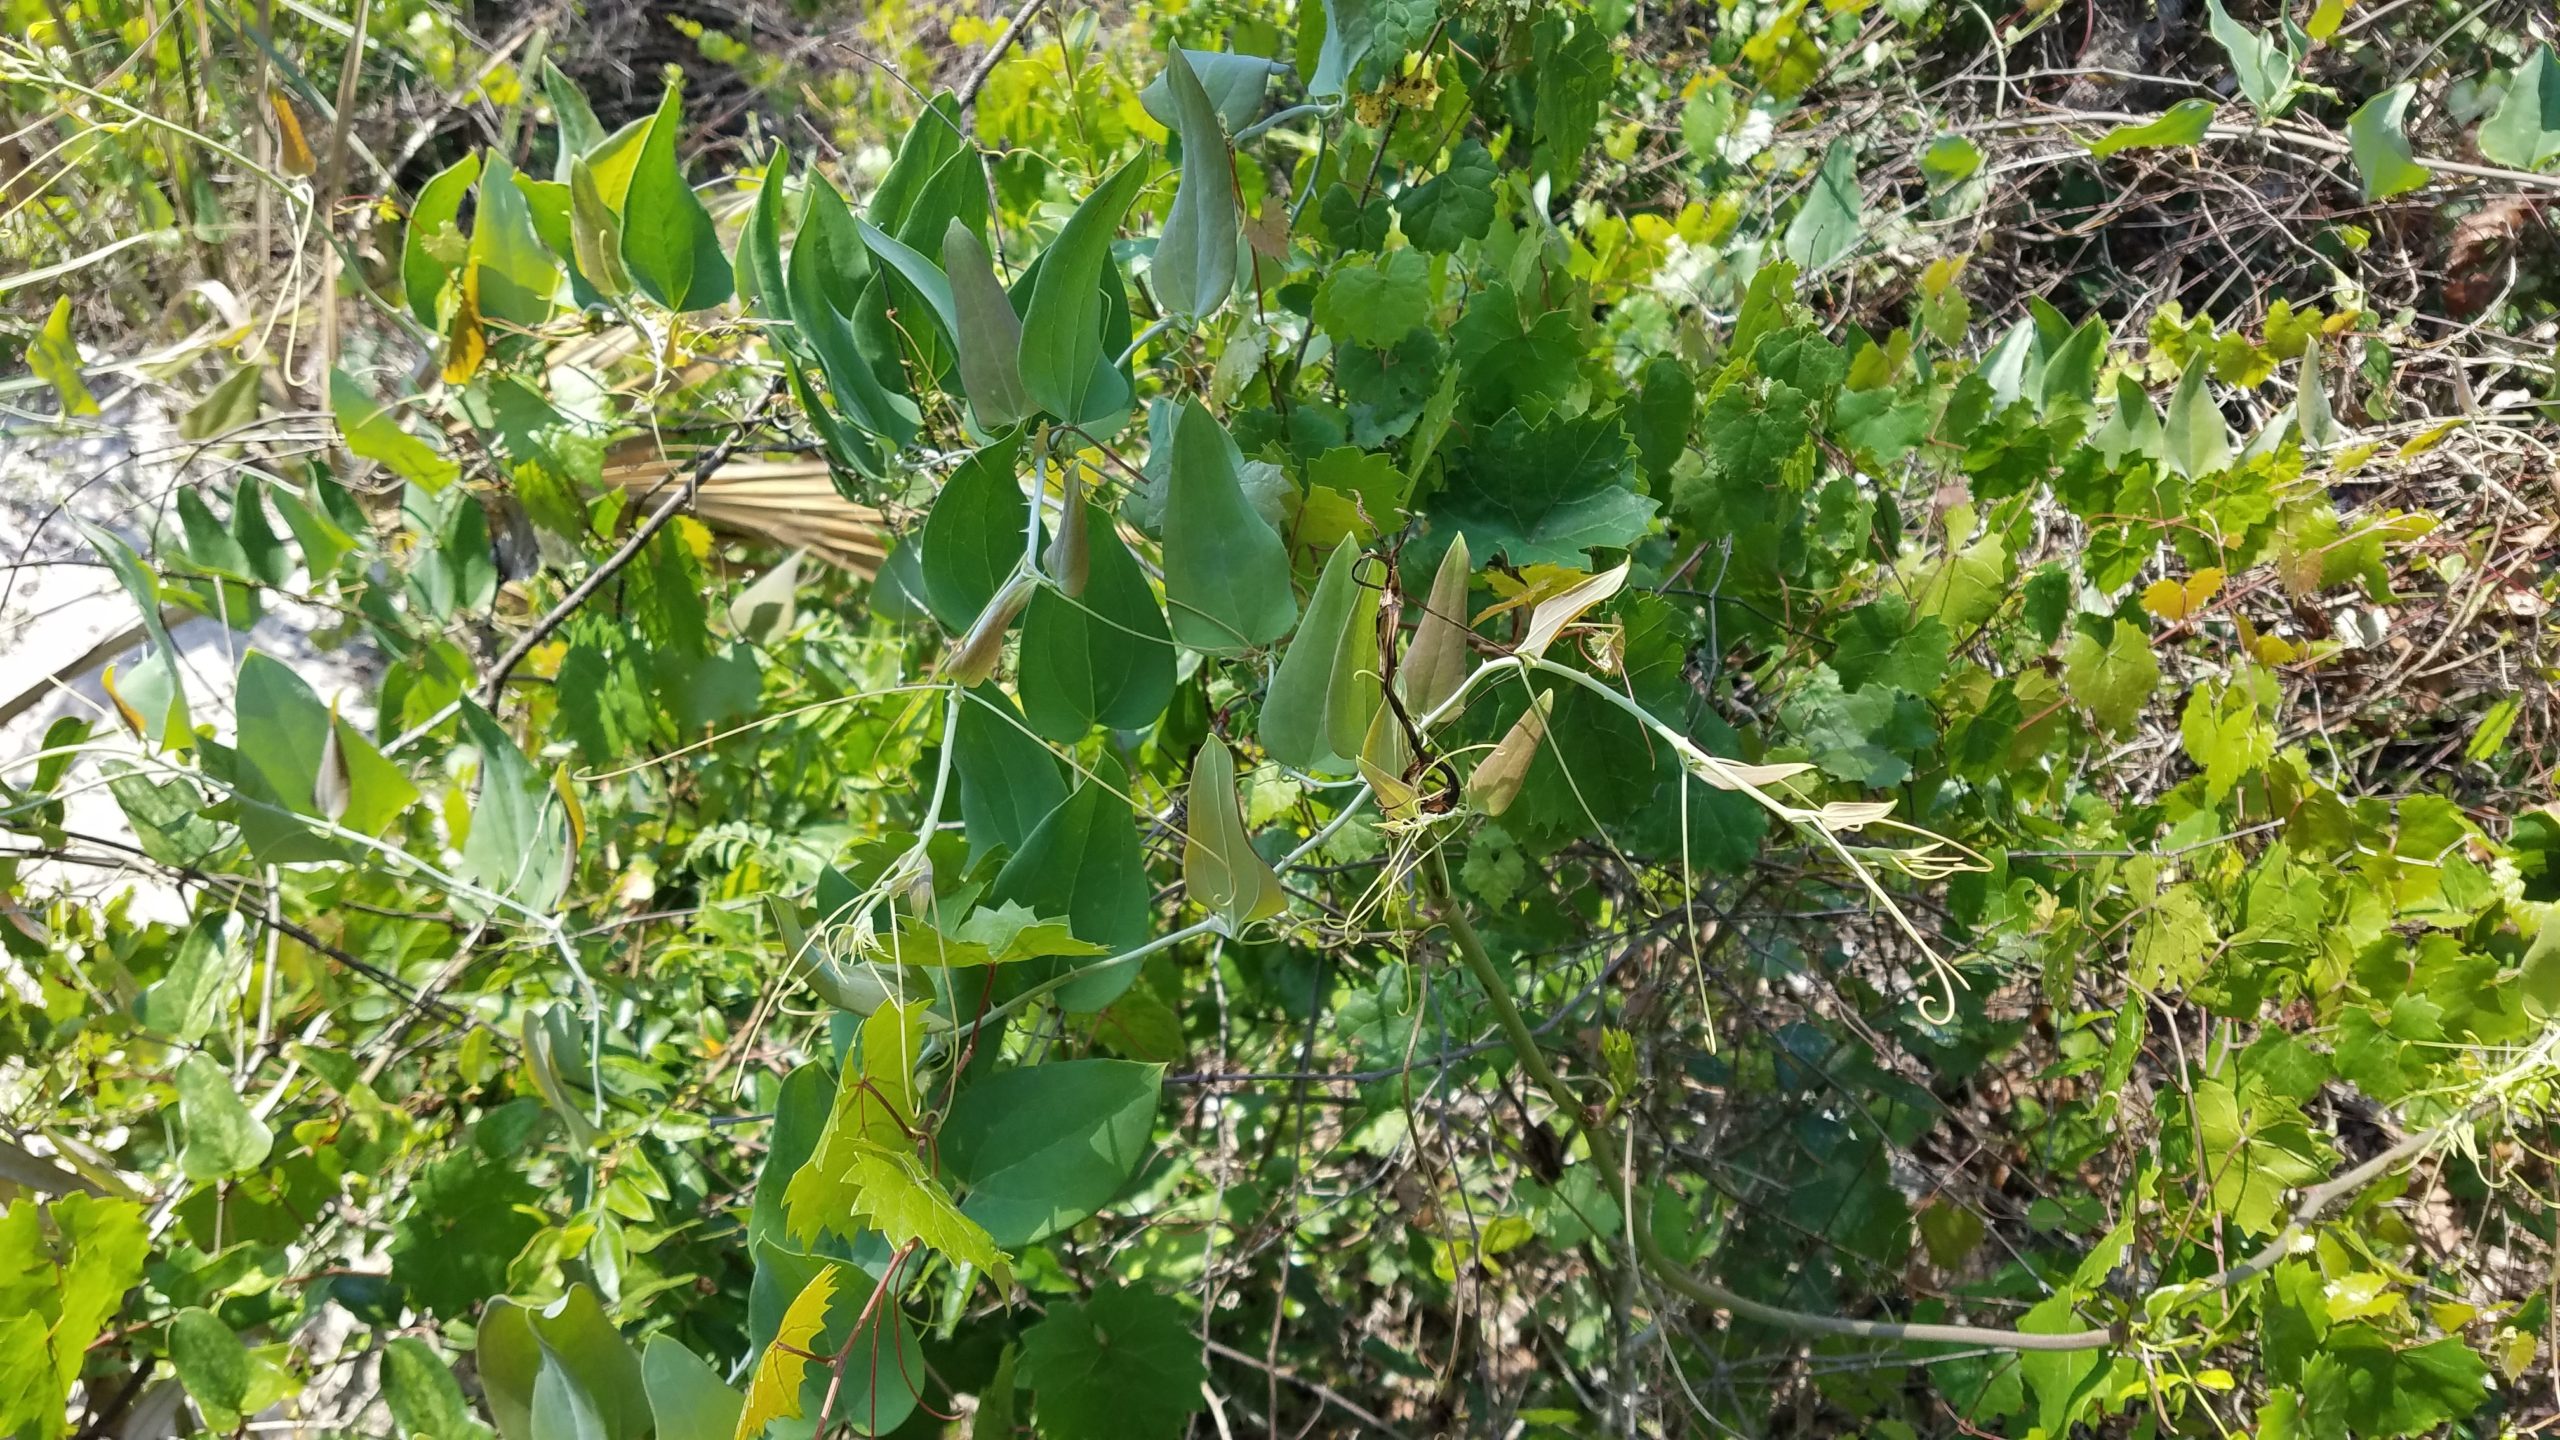 Smilax glauca we found at Rye Preserve. We made a herbarium voucher because it is rare for our area.